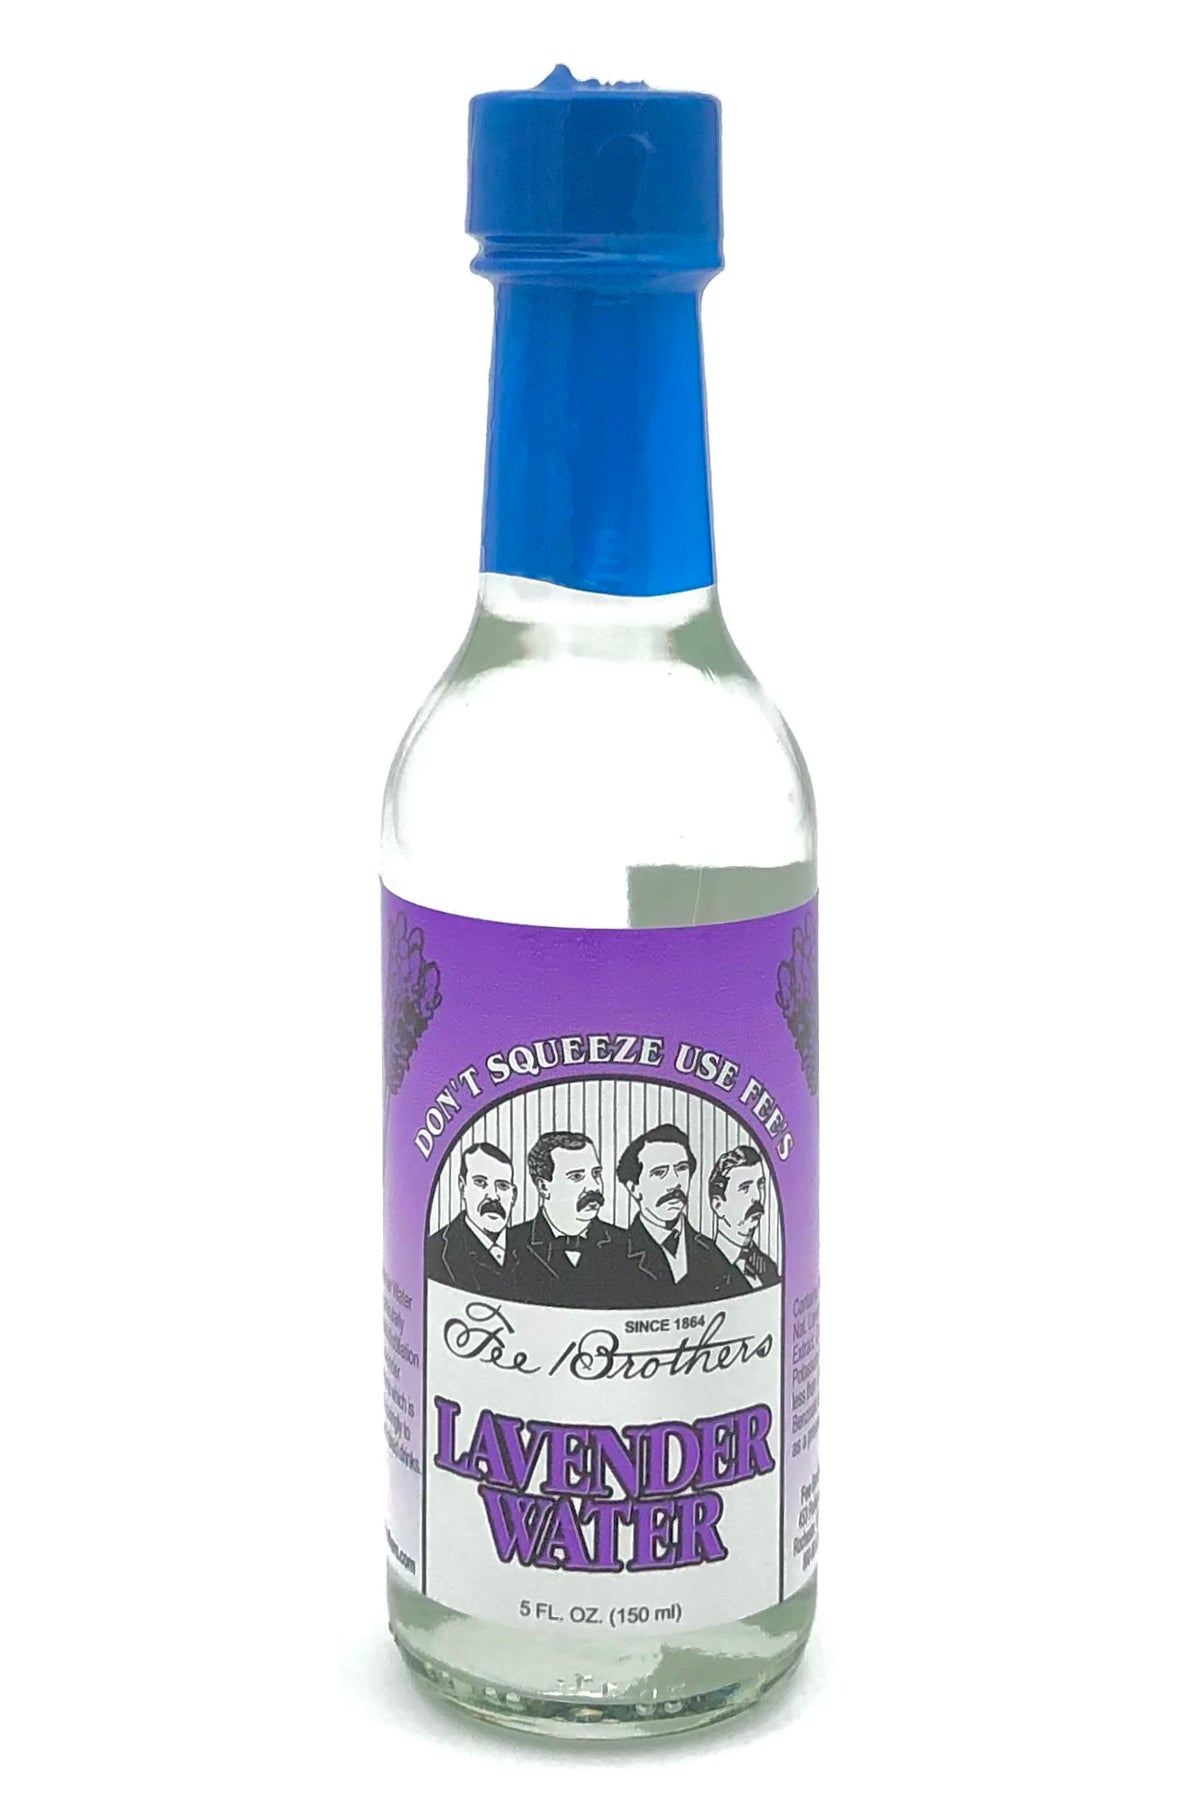 Fee Brothers Lavender Water 5 oz